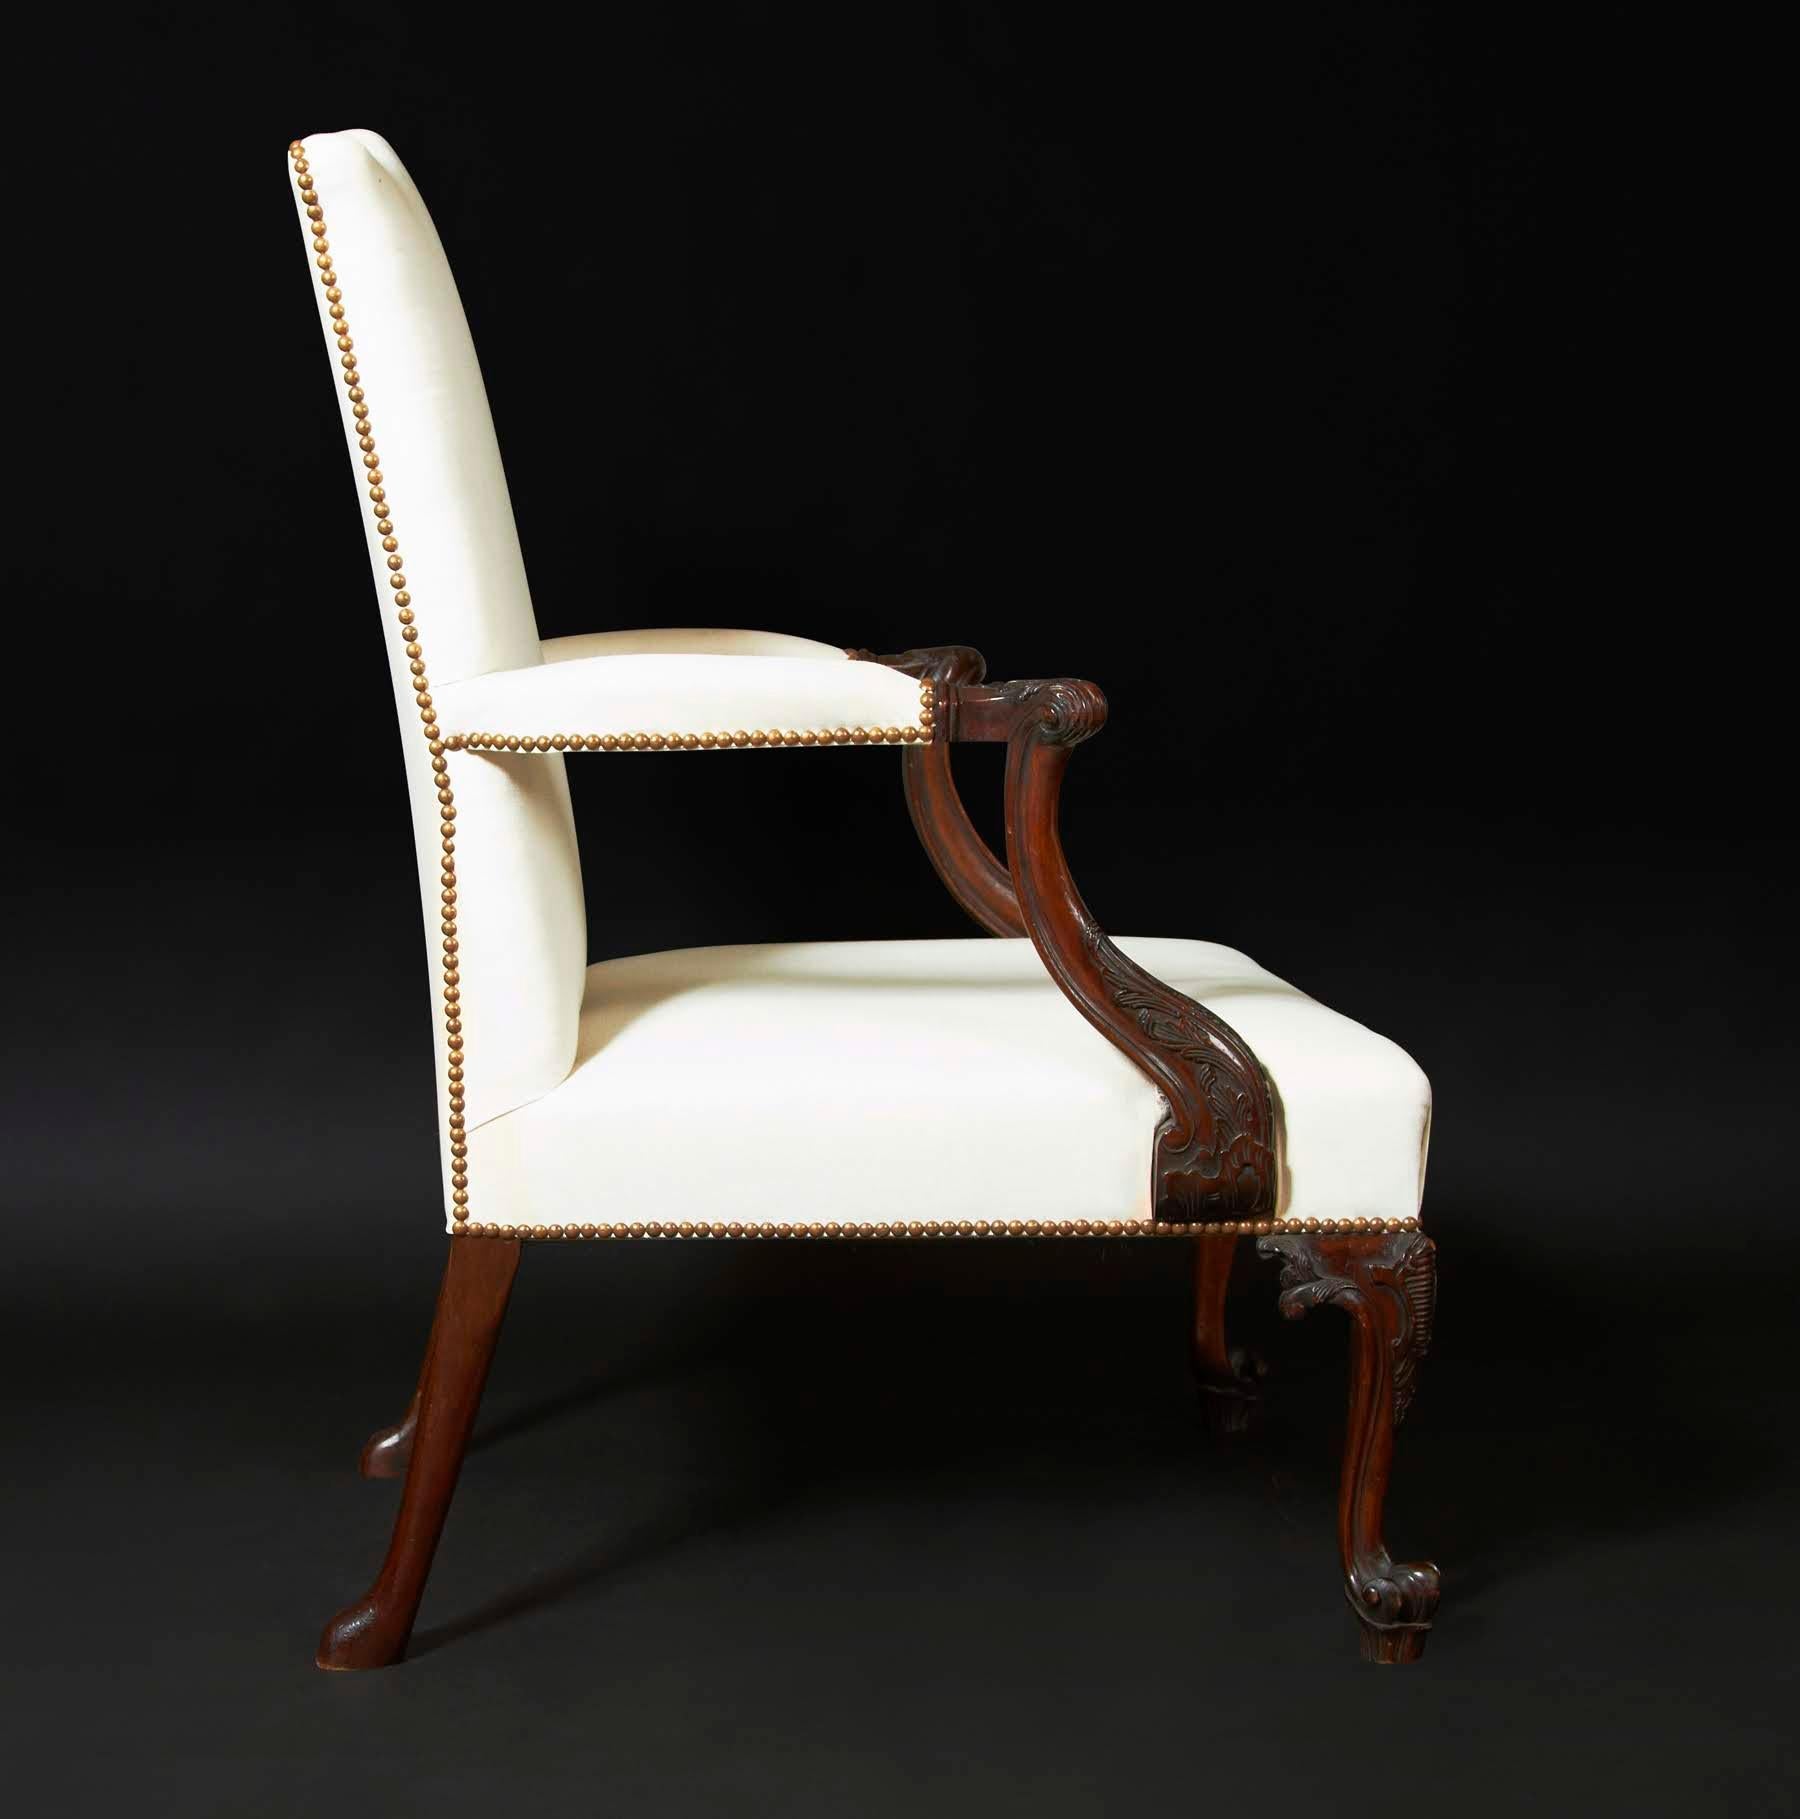 The Chippendale Gainsborough armchair. This handsome carved mahogany library or “Gainsborough” armchair has a gently curving back and shaped arms that have acanthus leaf carved scrolled handles and leaf carved molded supports. The padded seat is